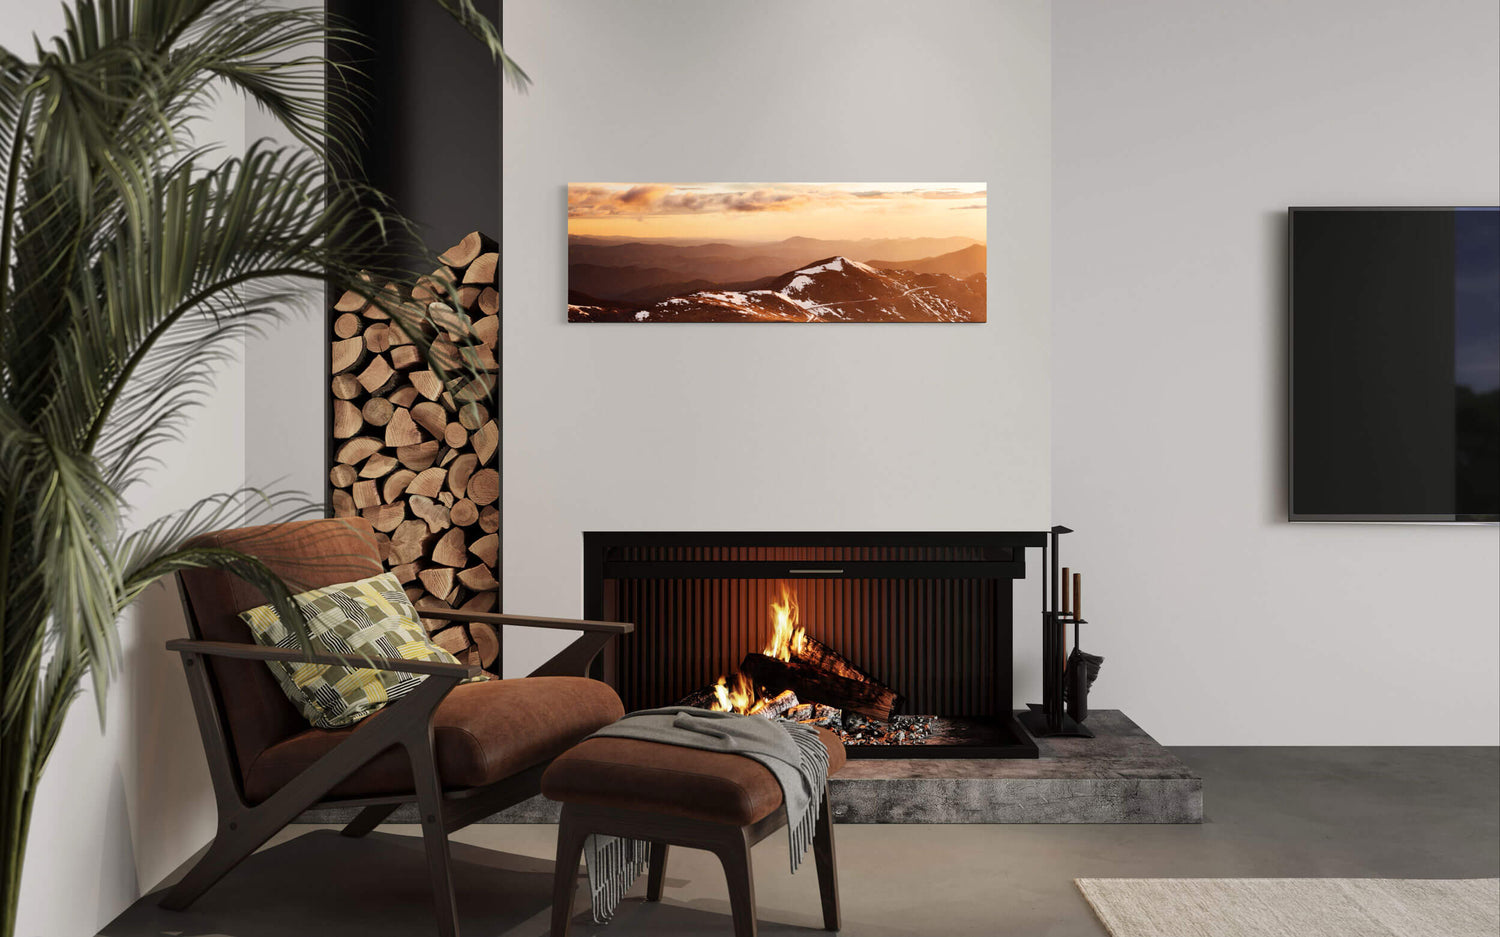 A piece of Colorado art showing a sunrise from Mount Evans looking toward Denver hangs in a living room.